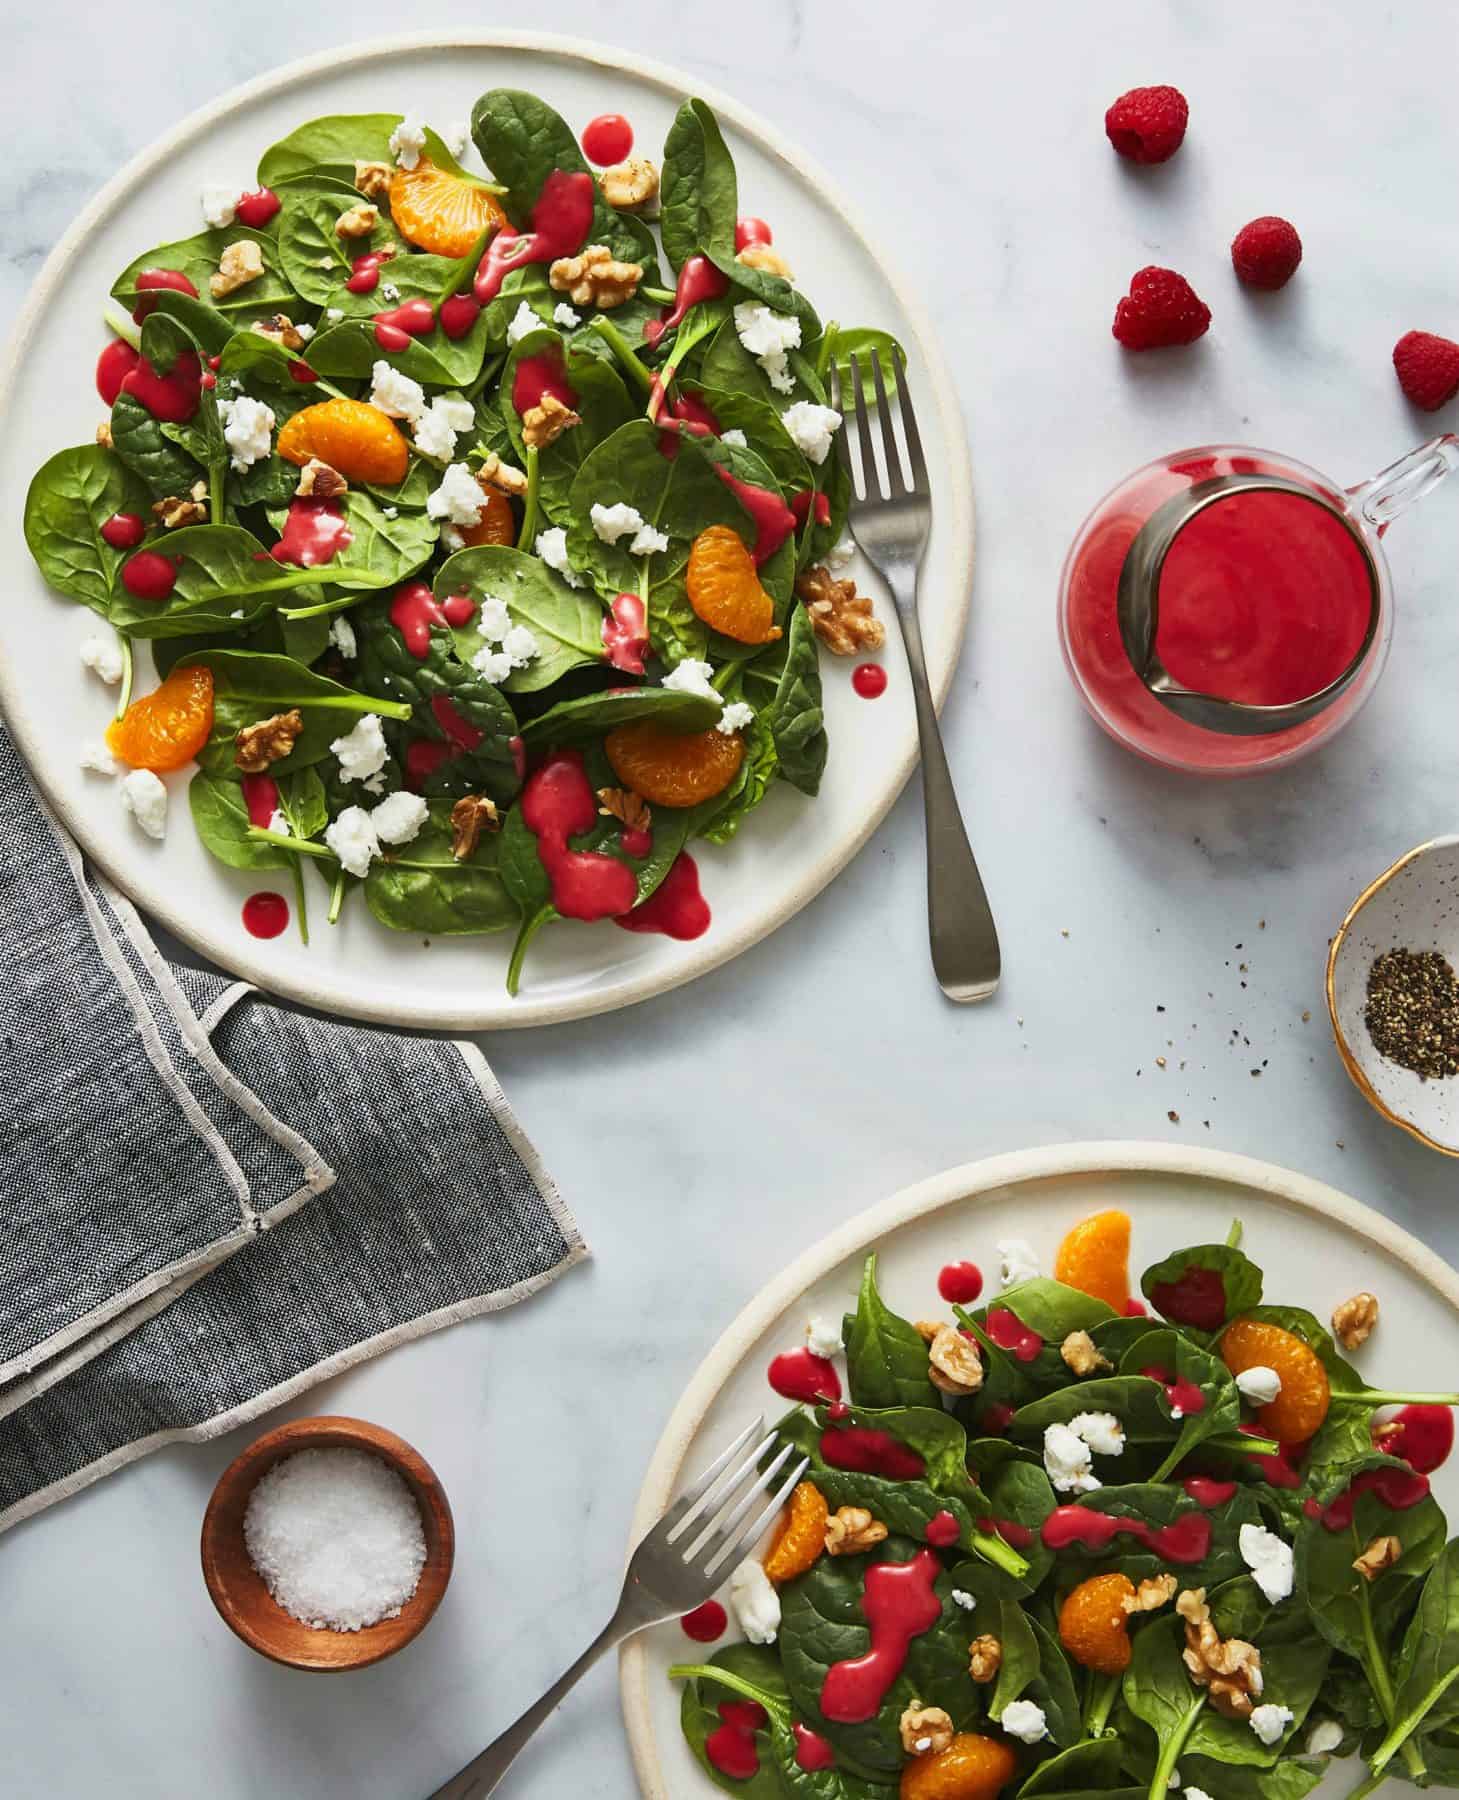 Spinach, Goat Cheese & Walnut Salad with Raspberry Vinaigrette on white plates